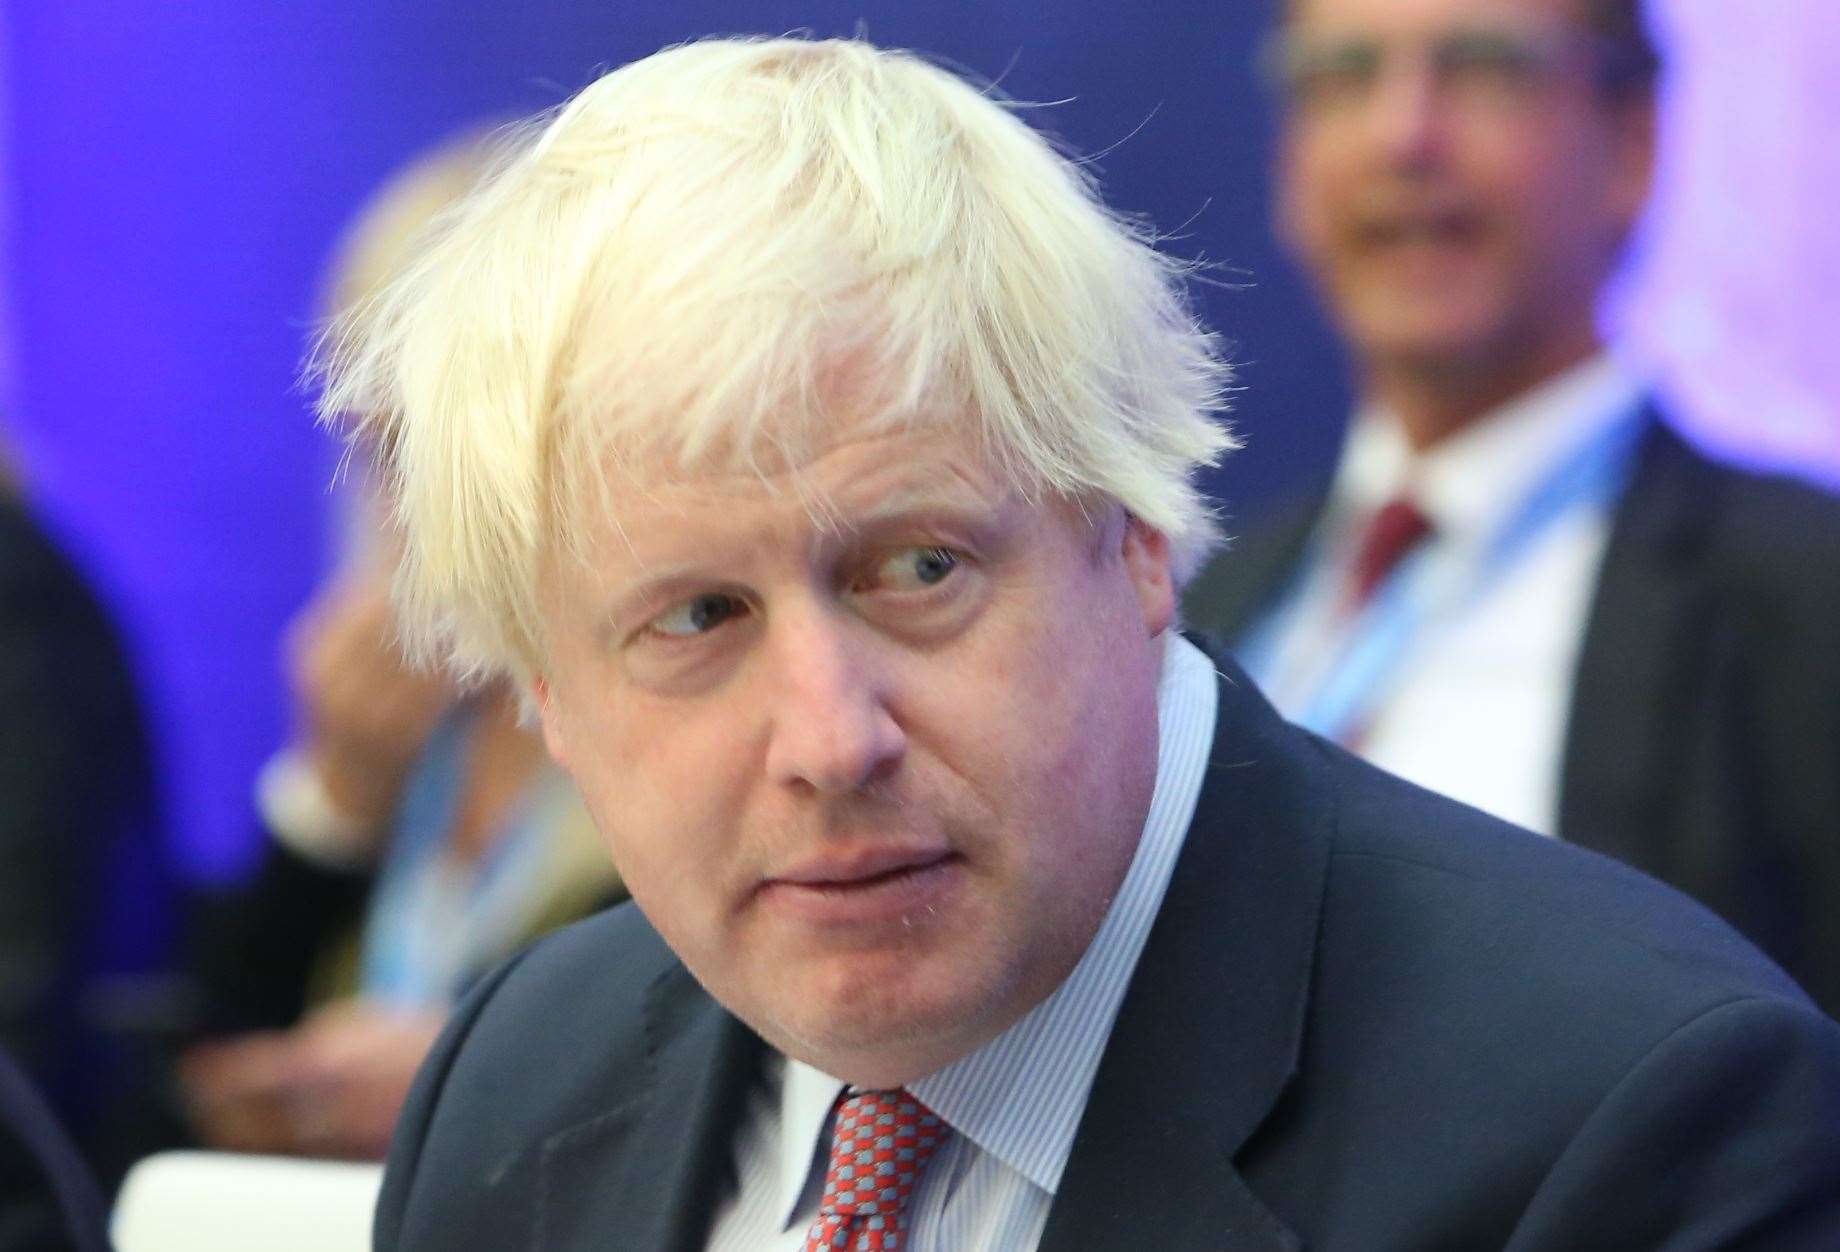 Former PM Boris Johnson made a mighty blunder after saying Canterbury was going to get a new hospital in 2019